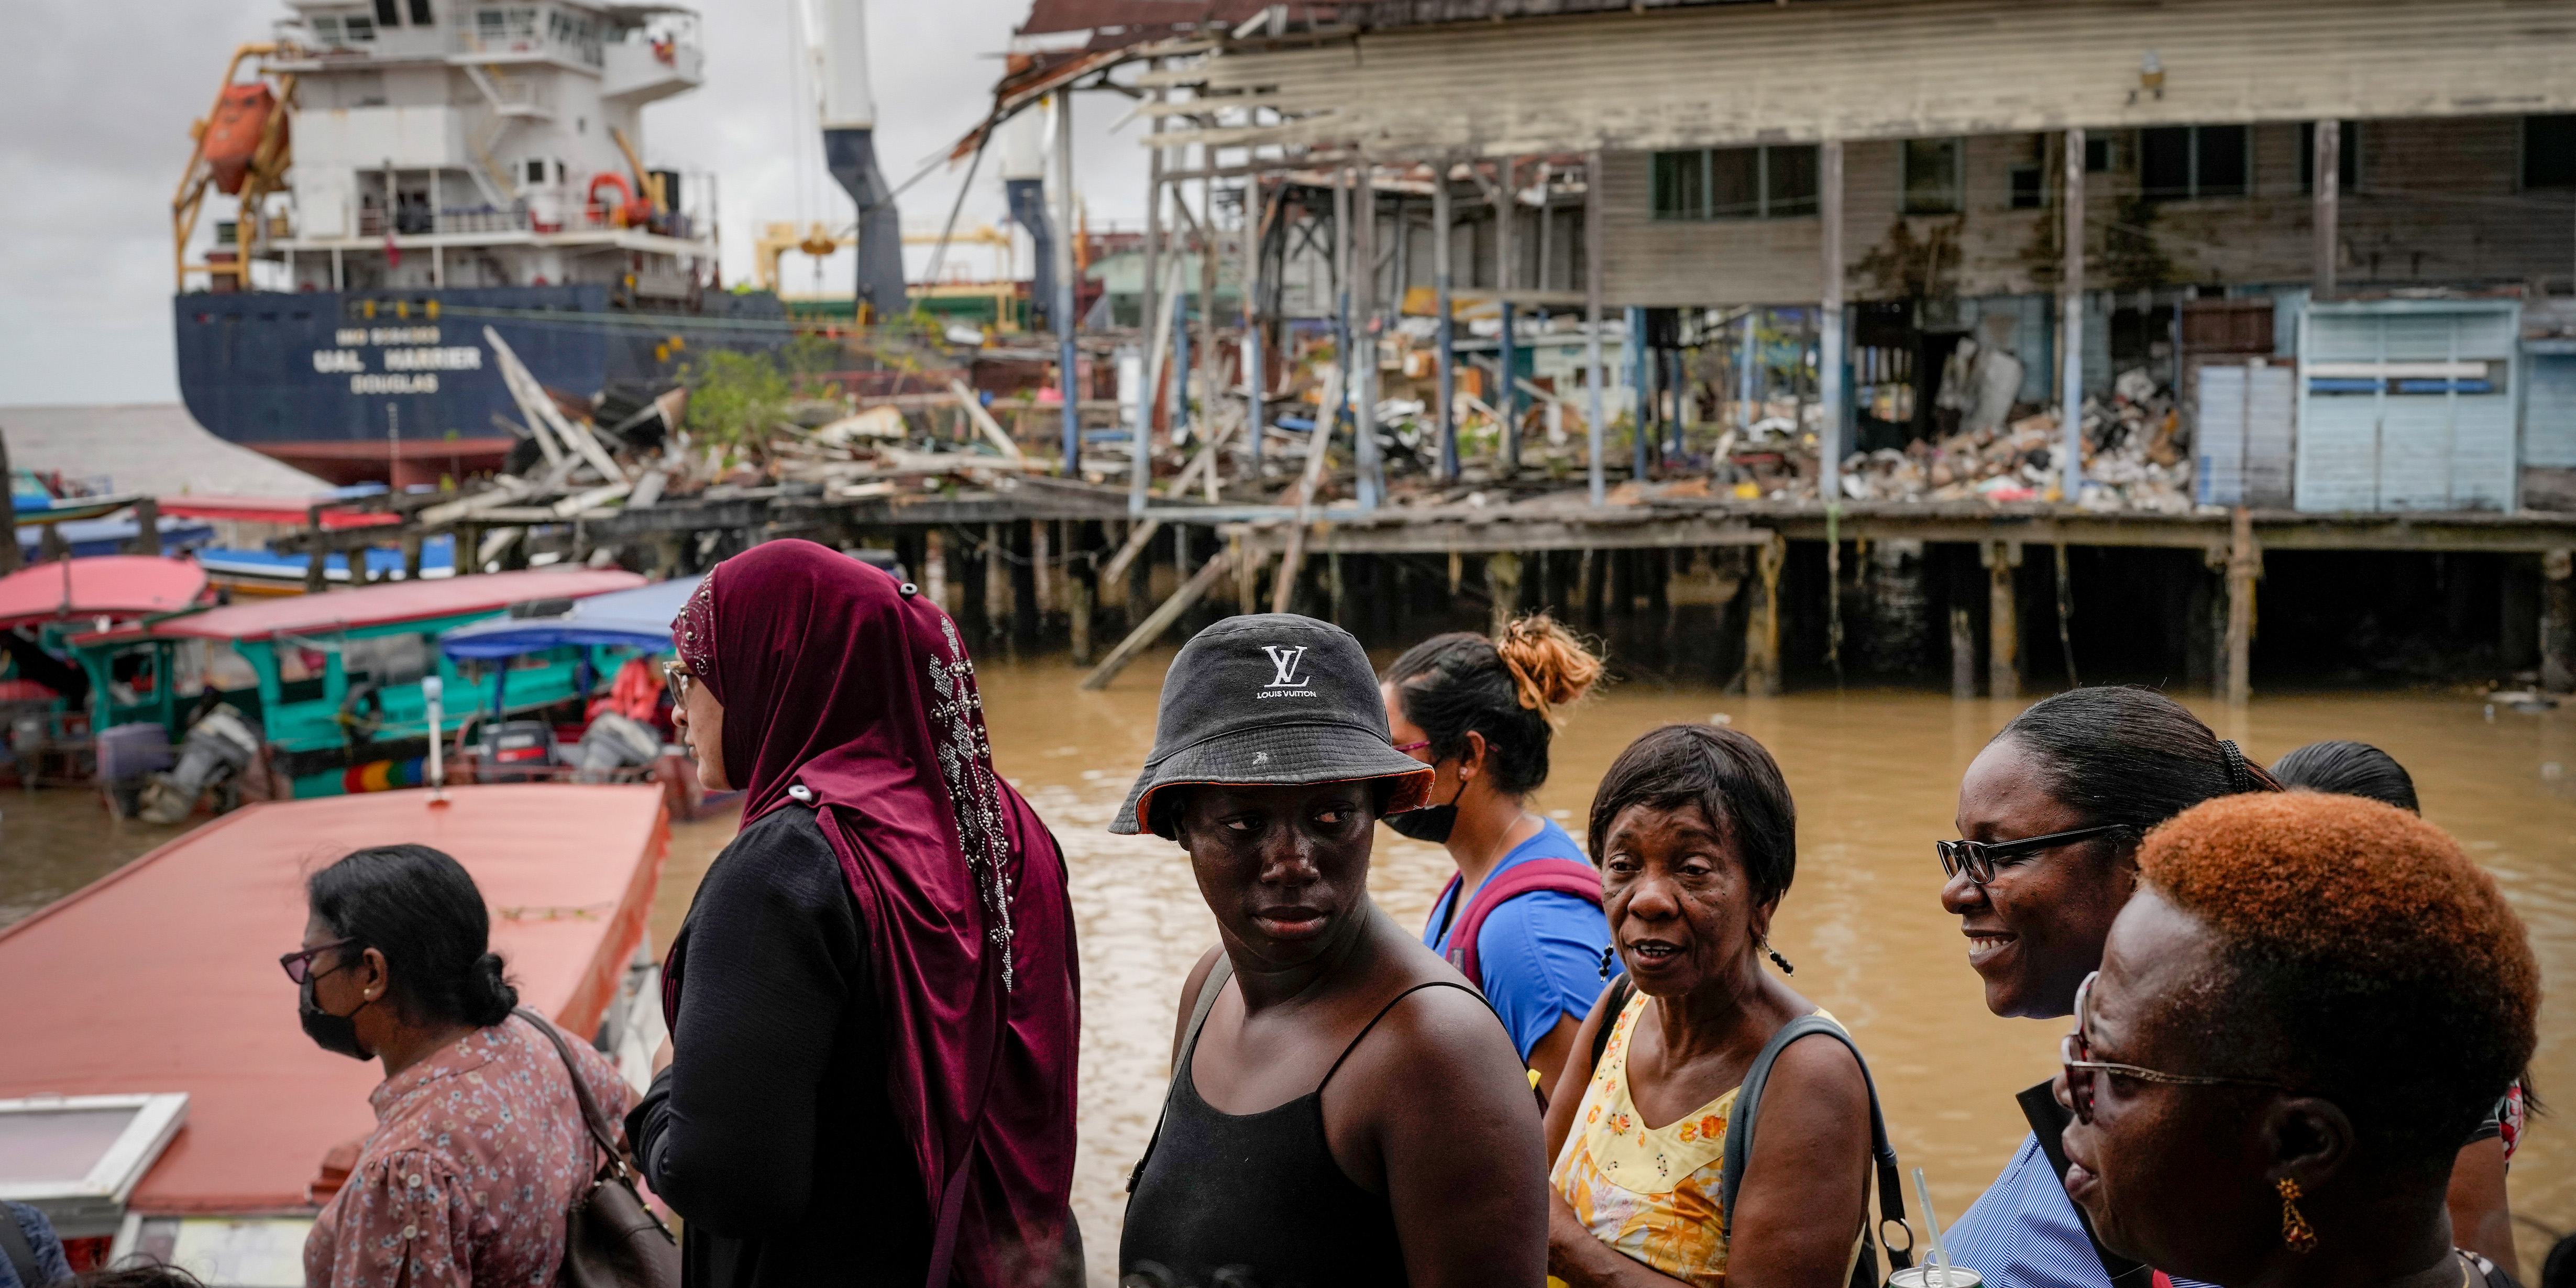 People wait at the Stabroek Market to ferry across the Demerara River, near a container ship in Georgetown, Guyana, Wednesday, April 12, 2023.  Guayana is poised to become the world’s fourth-largest offshore oil producer, placing it ahead of Qatar, the United States, Mexico and Norway.  (AP Photo/Matias Delacroix)